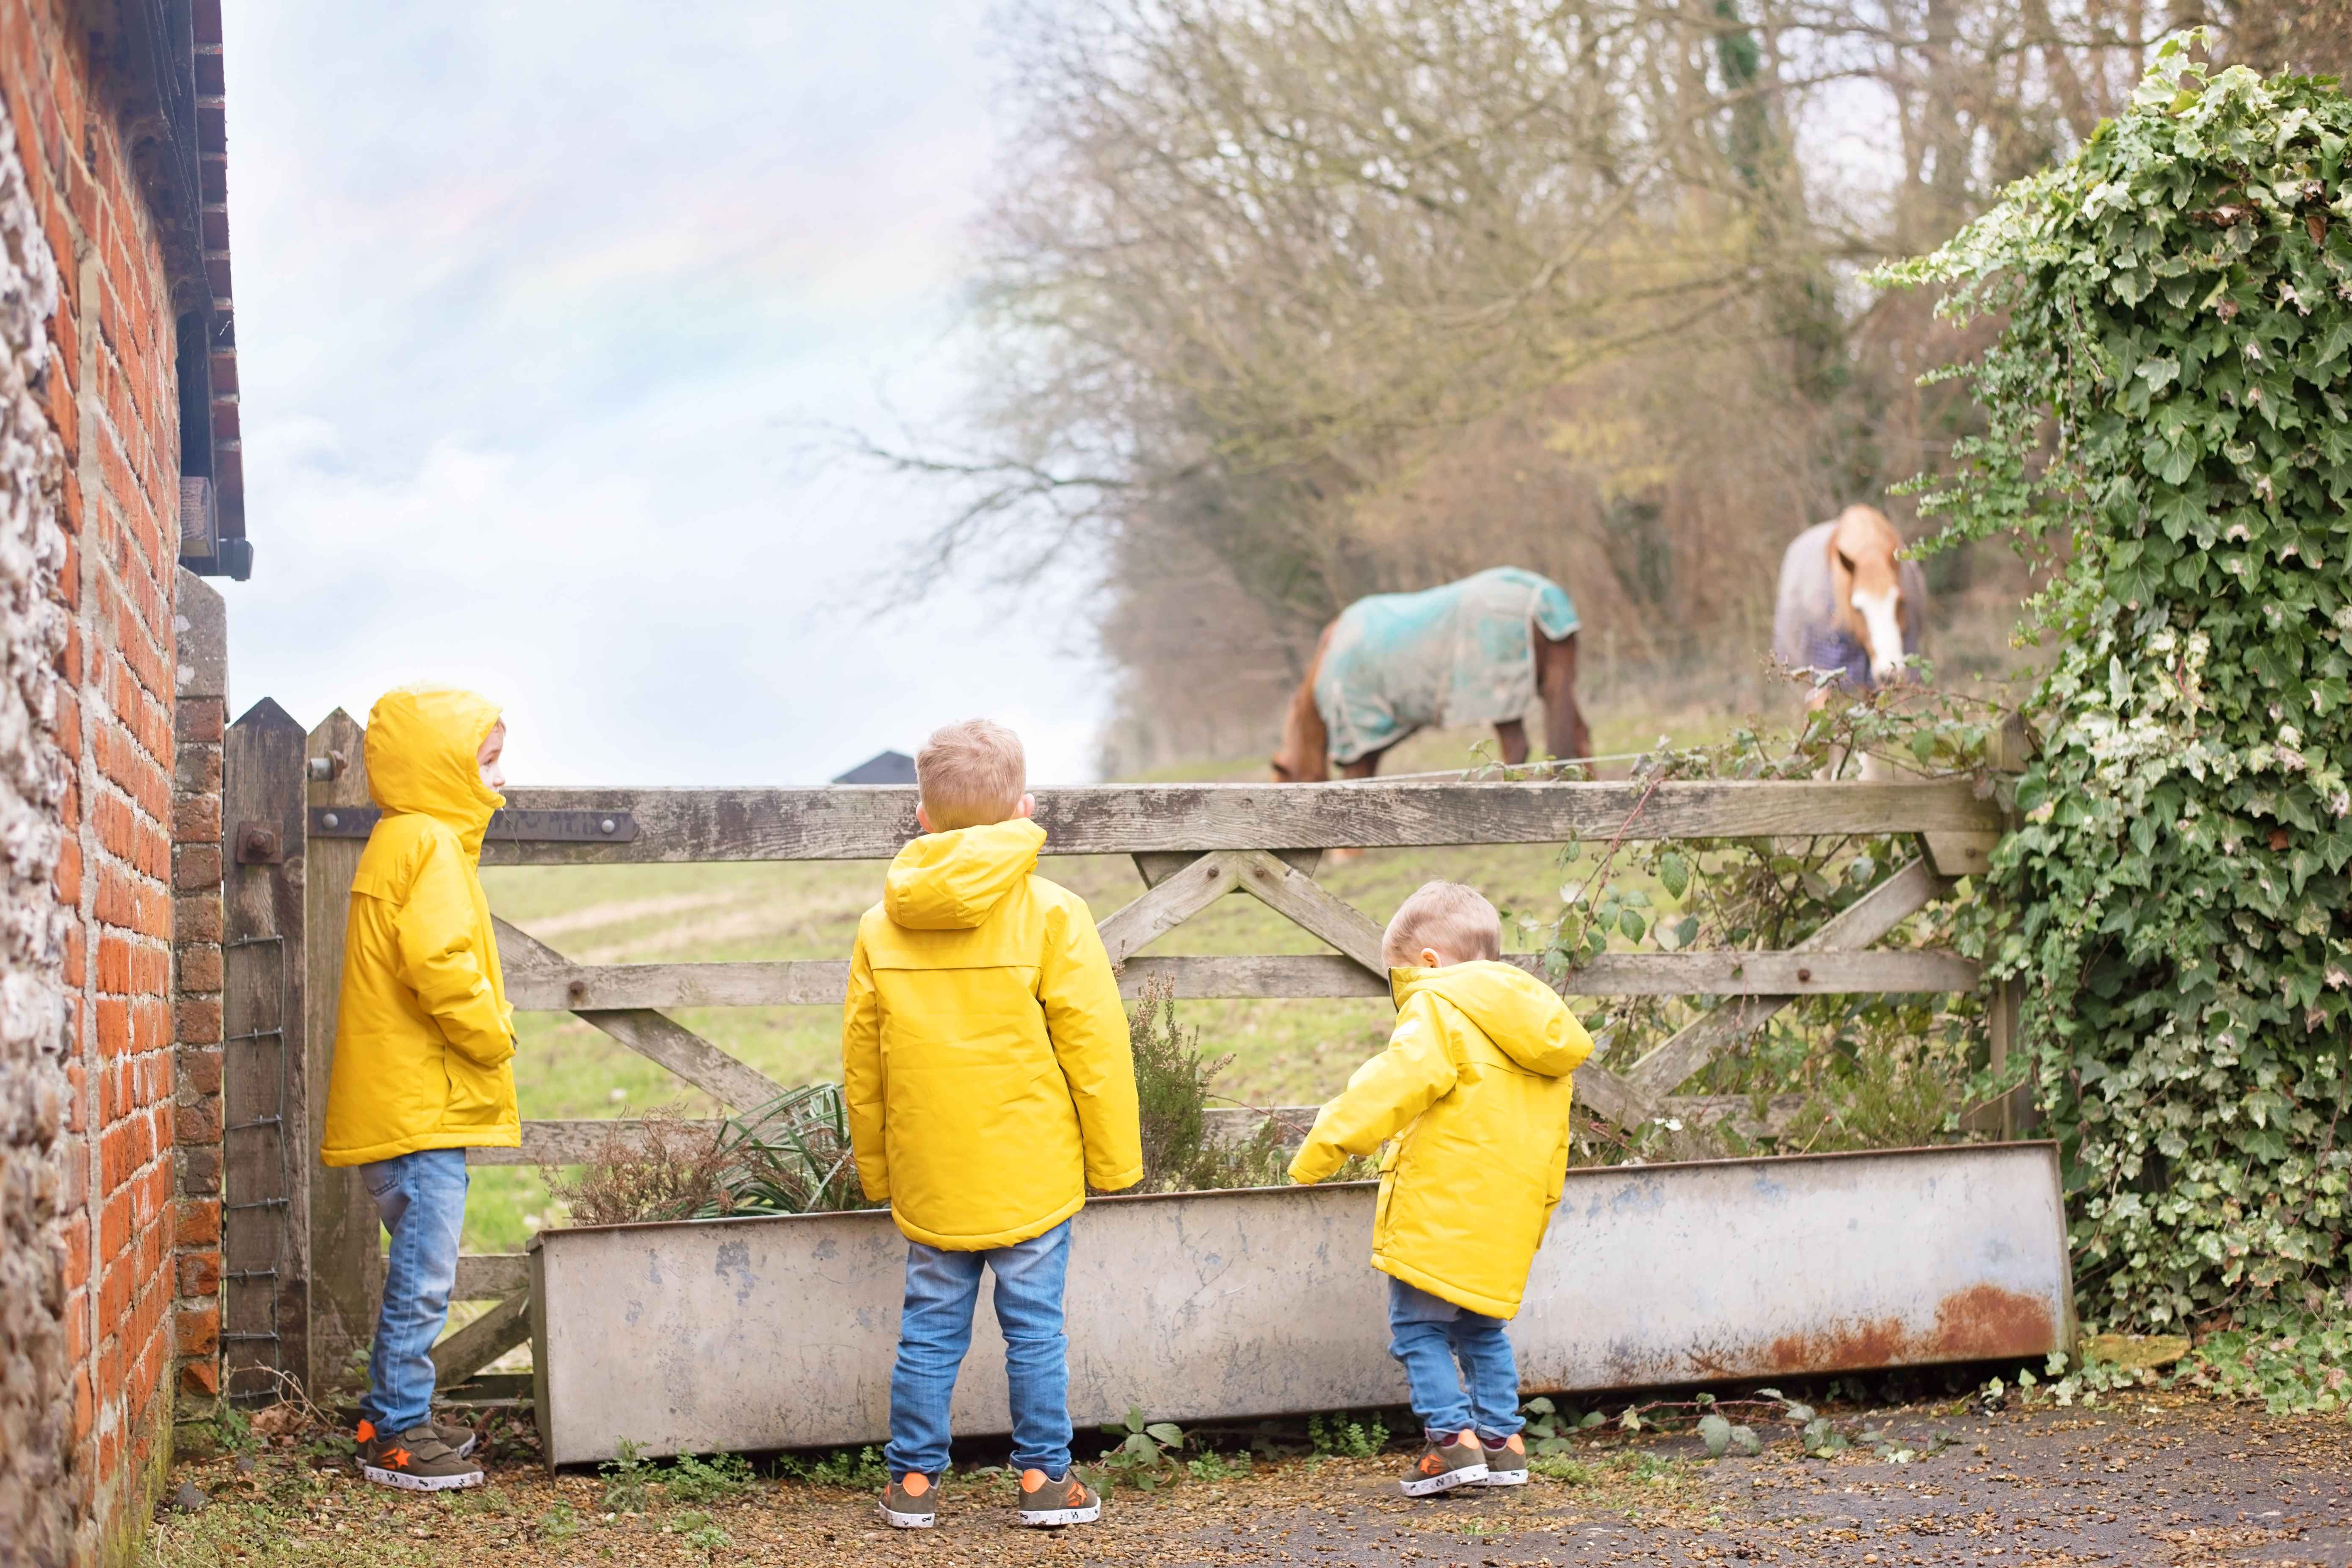 FUN ON THE FARM WITH NEXT KIDS AND BOCKETTS FARM